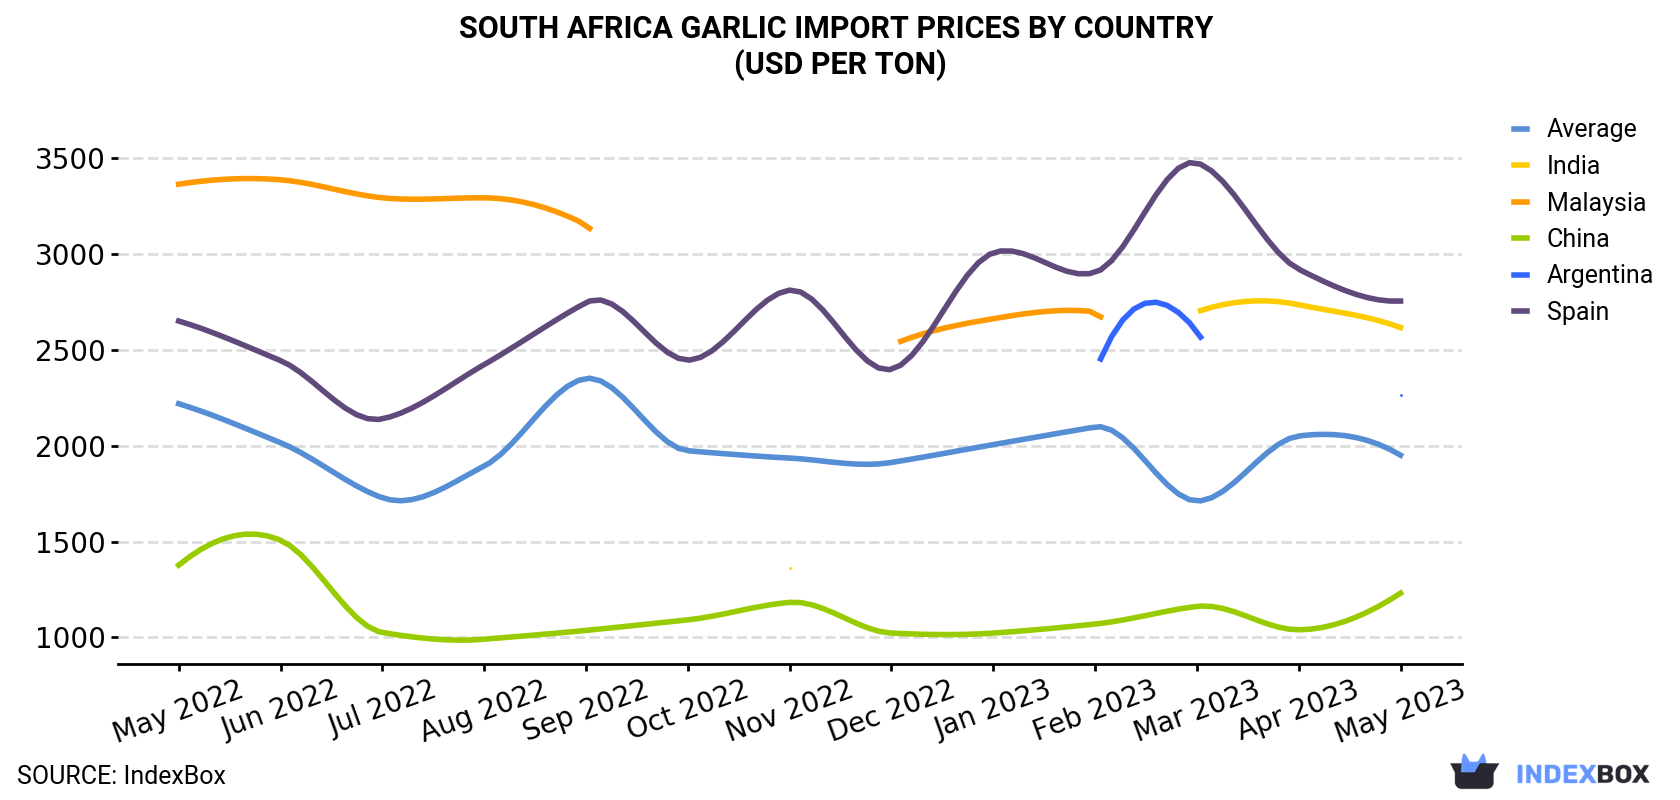 South Africa Garlic Import Prices By Country (USD Per Ton)